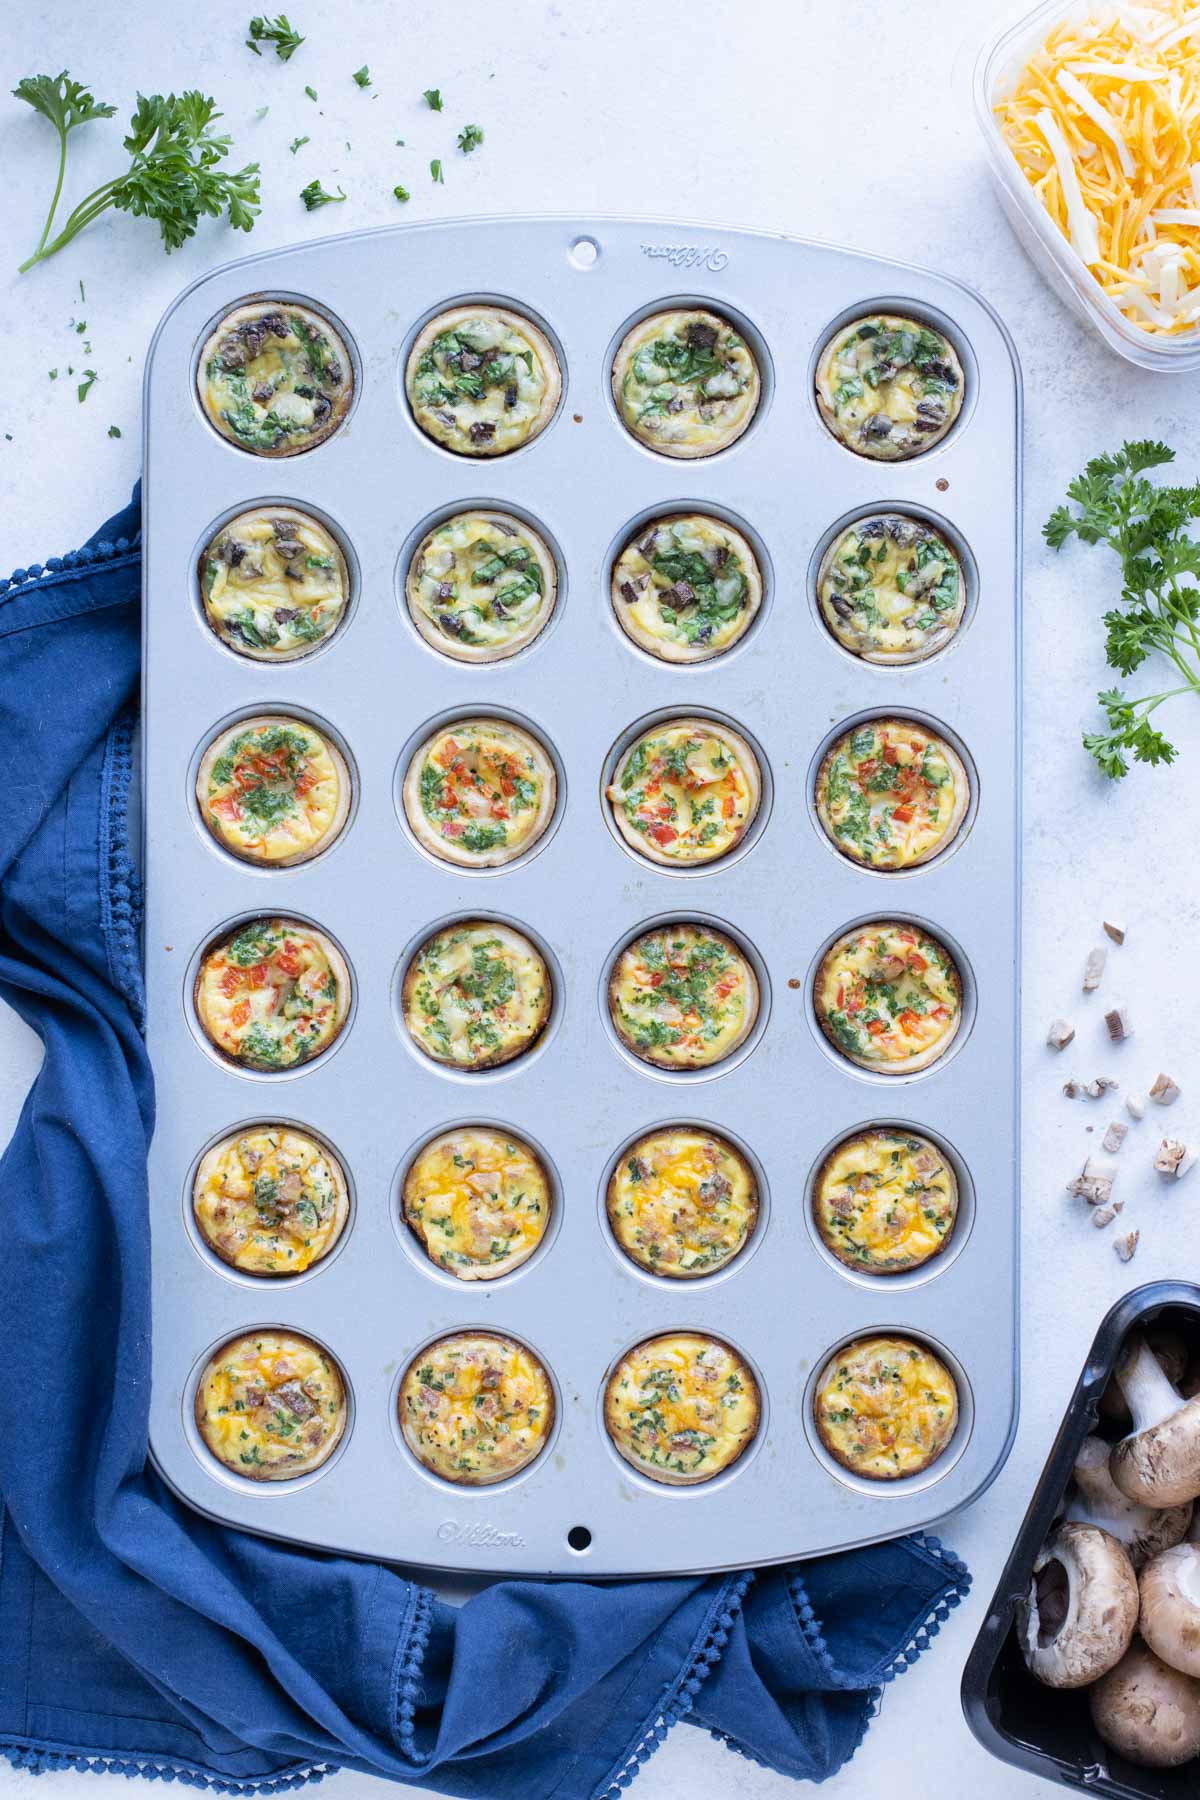 Mini quiches are baked in the oven until fluffy.